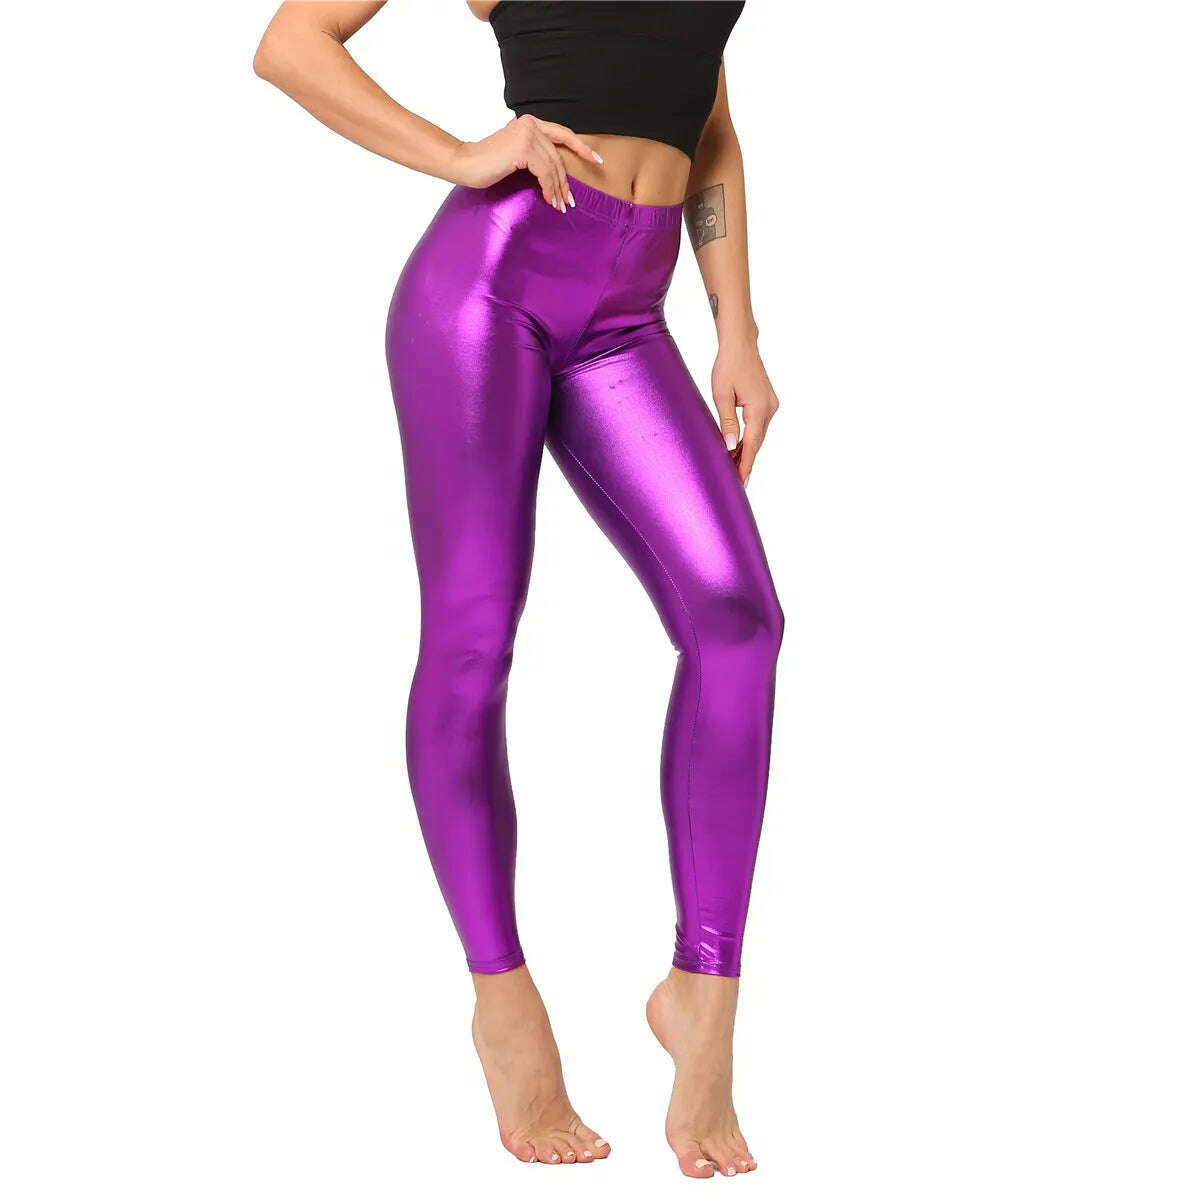 KIMLUD, Metallic Color PU Leggings Women Faux Leather Pants Dancing Party Pant Sexy Night Club Skinny Costume Pants Tight Trousers, Purple / One size 50kg below, KIMLUD Women's Clothes